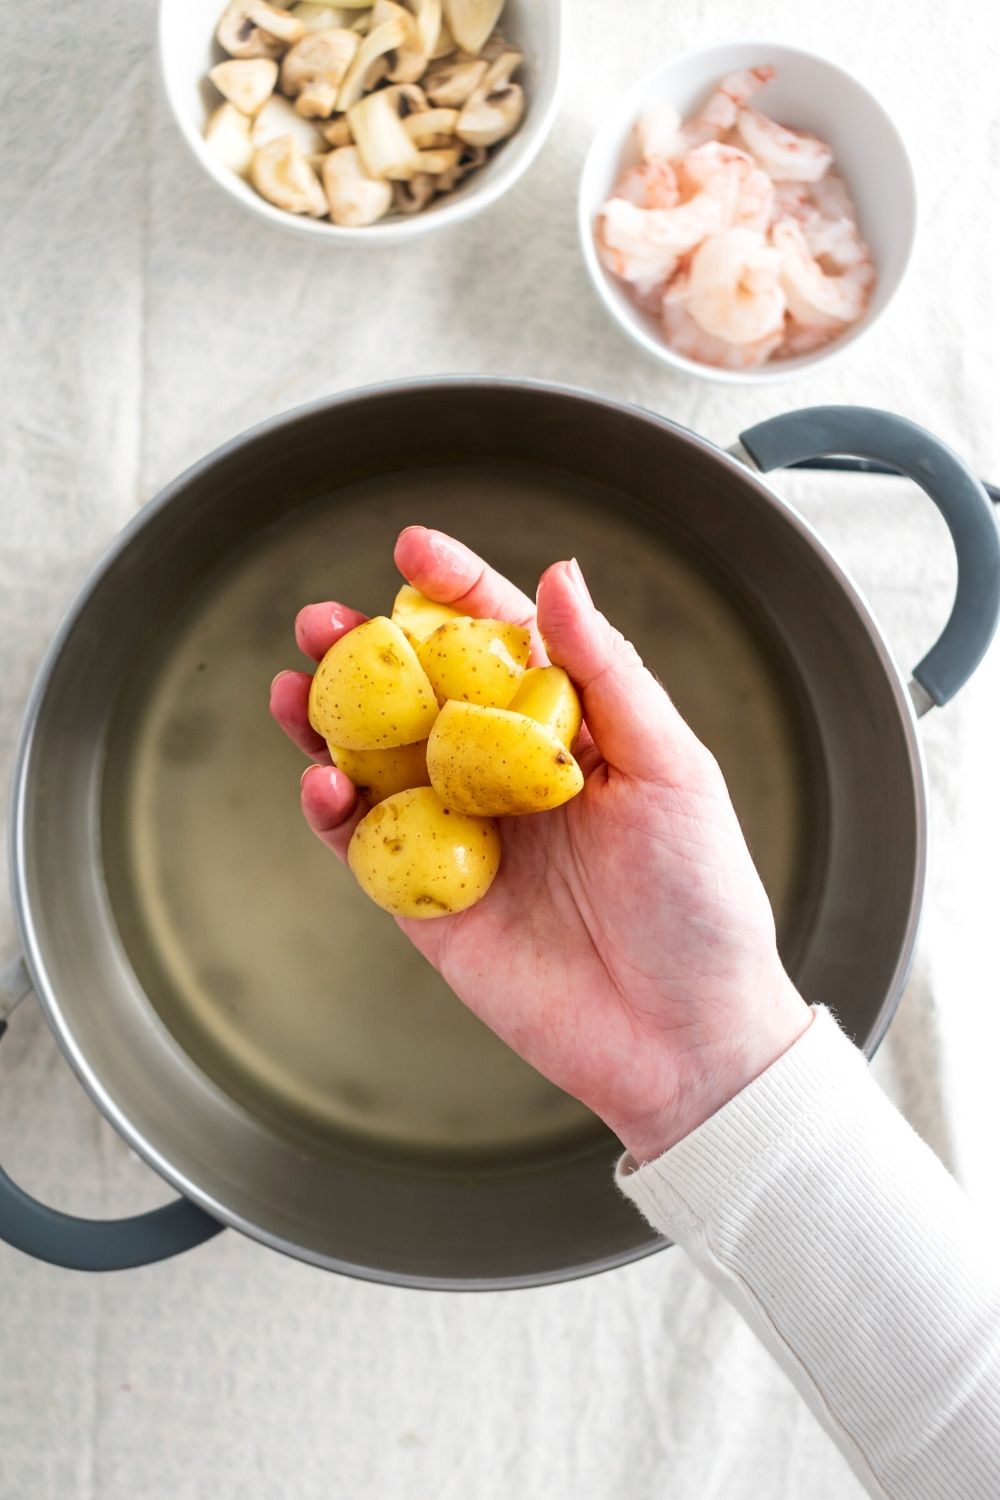 Hey hand holding small golden potatoes over a pot of water. Behind a pot of water is a white bowl of rice shrimp and part of a white bowl of mushrooms.